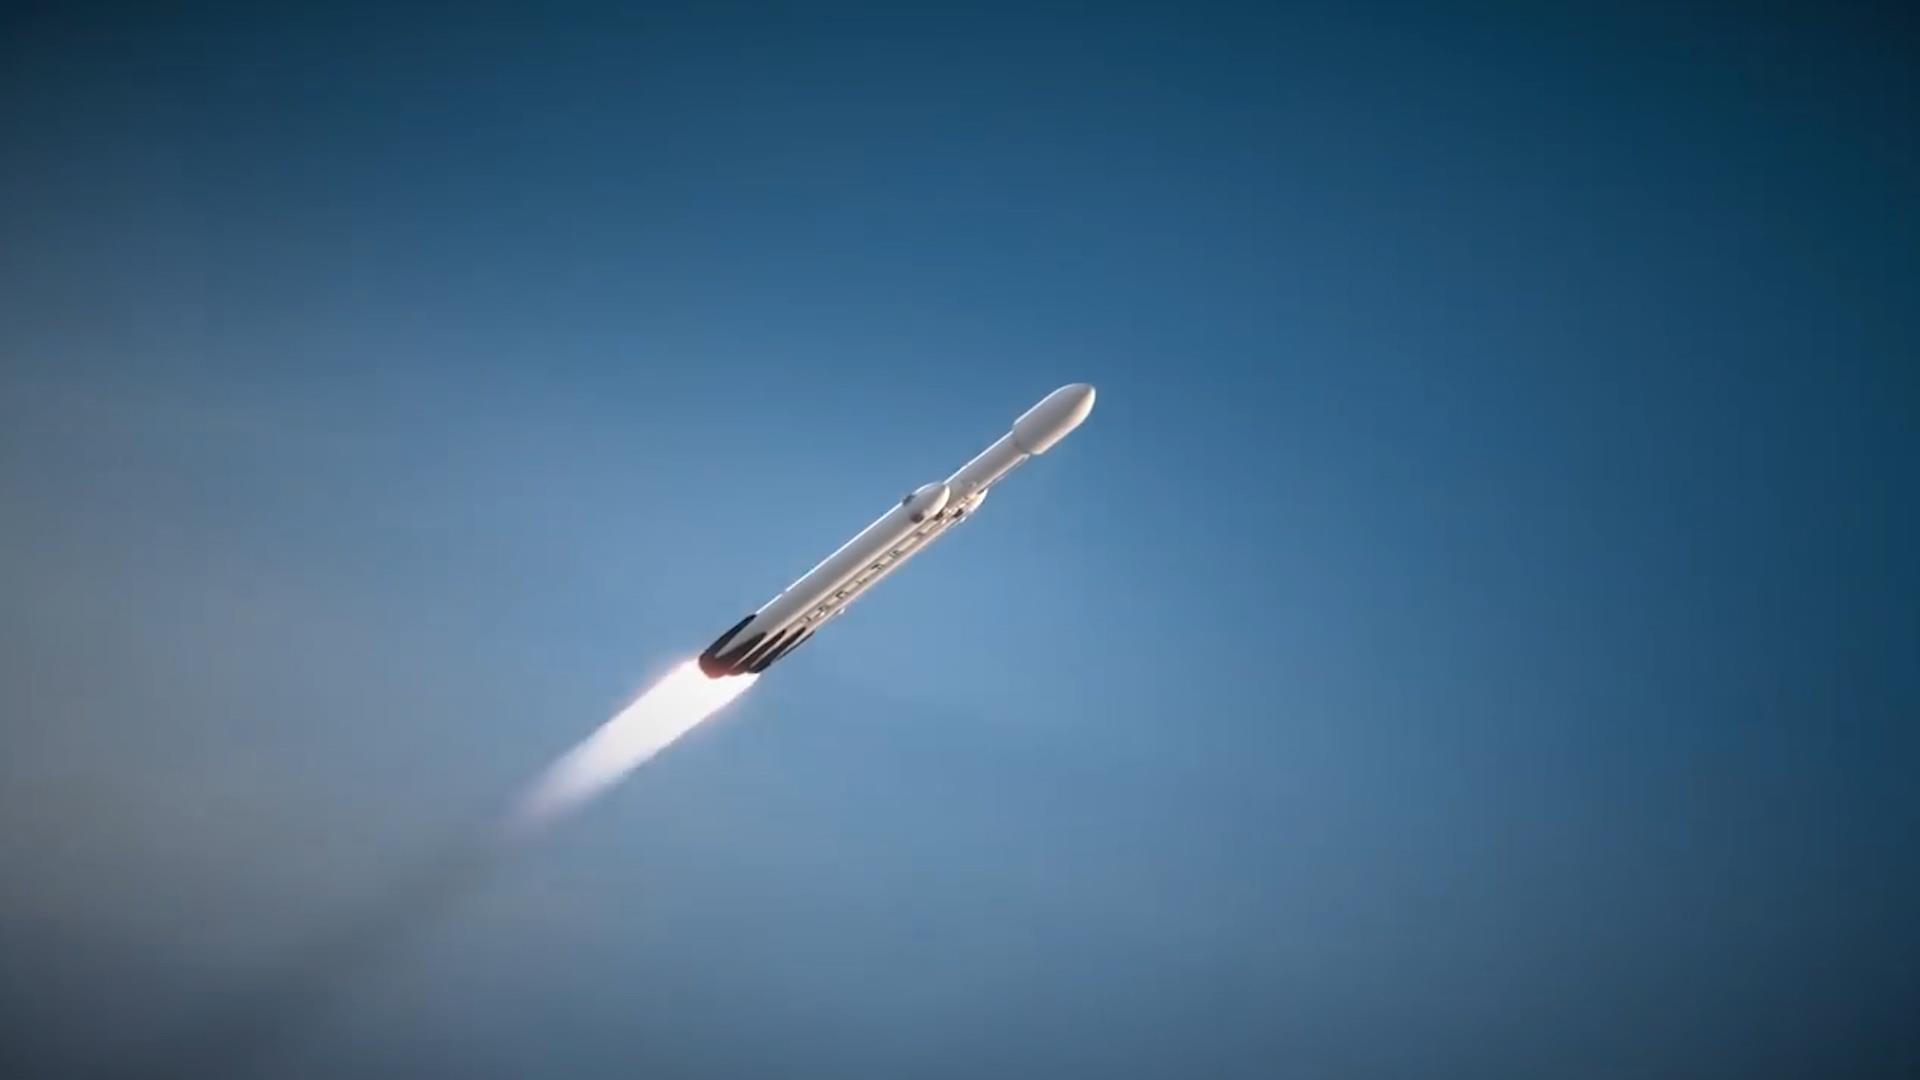 SpaceX's Falcon Heavy launch was a success